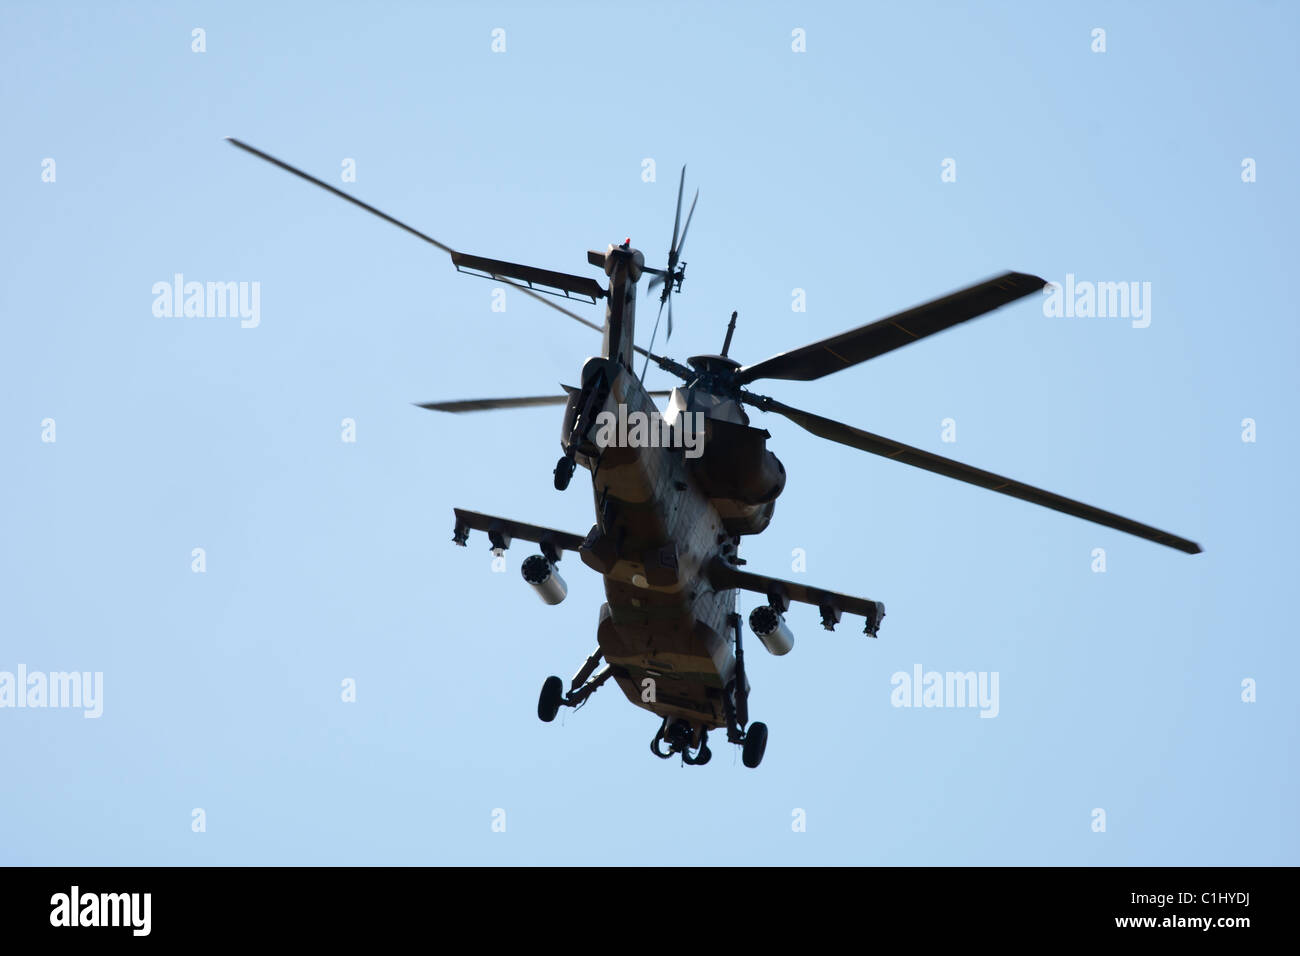 Rooivalk Angriff Hubschrauber Helikopter Air zeigen in Cape Town, South Africa, September 2010 Stockfoto